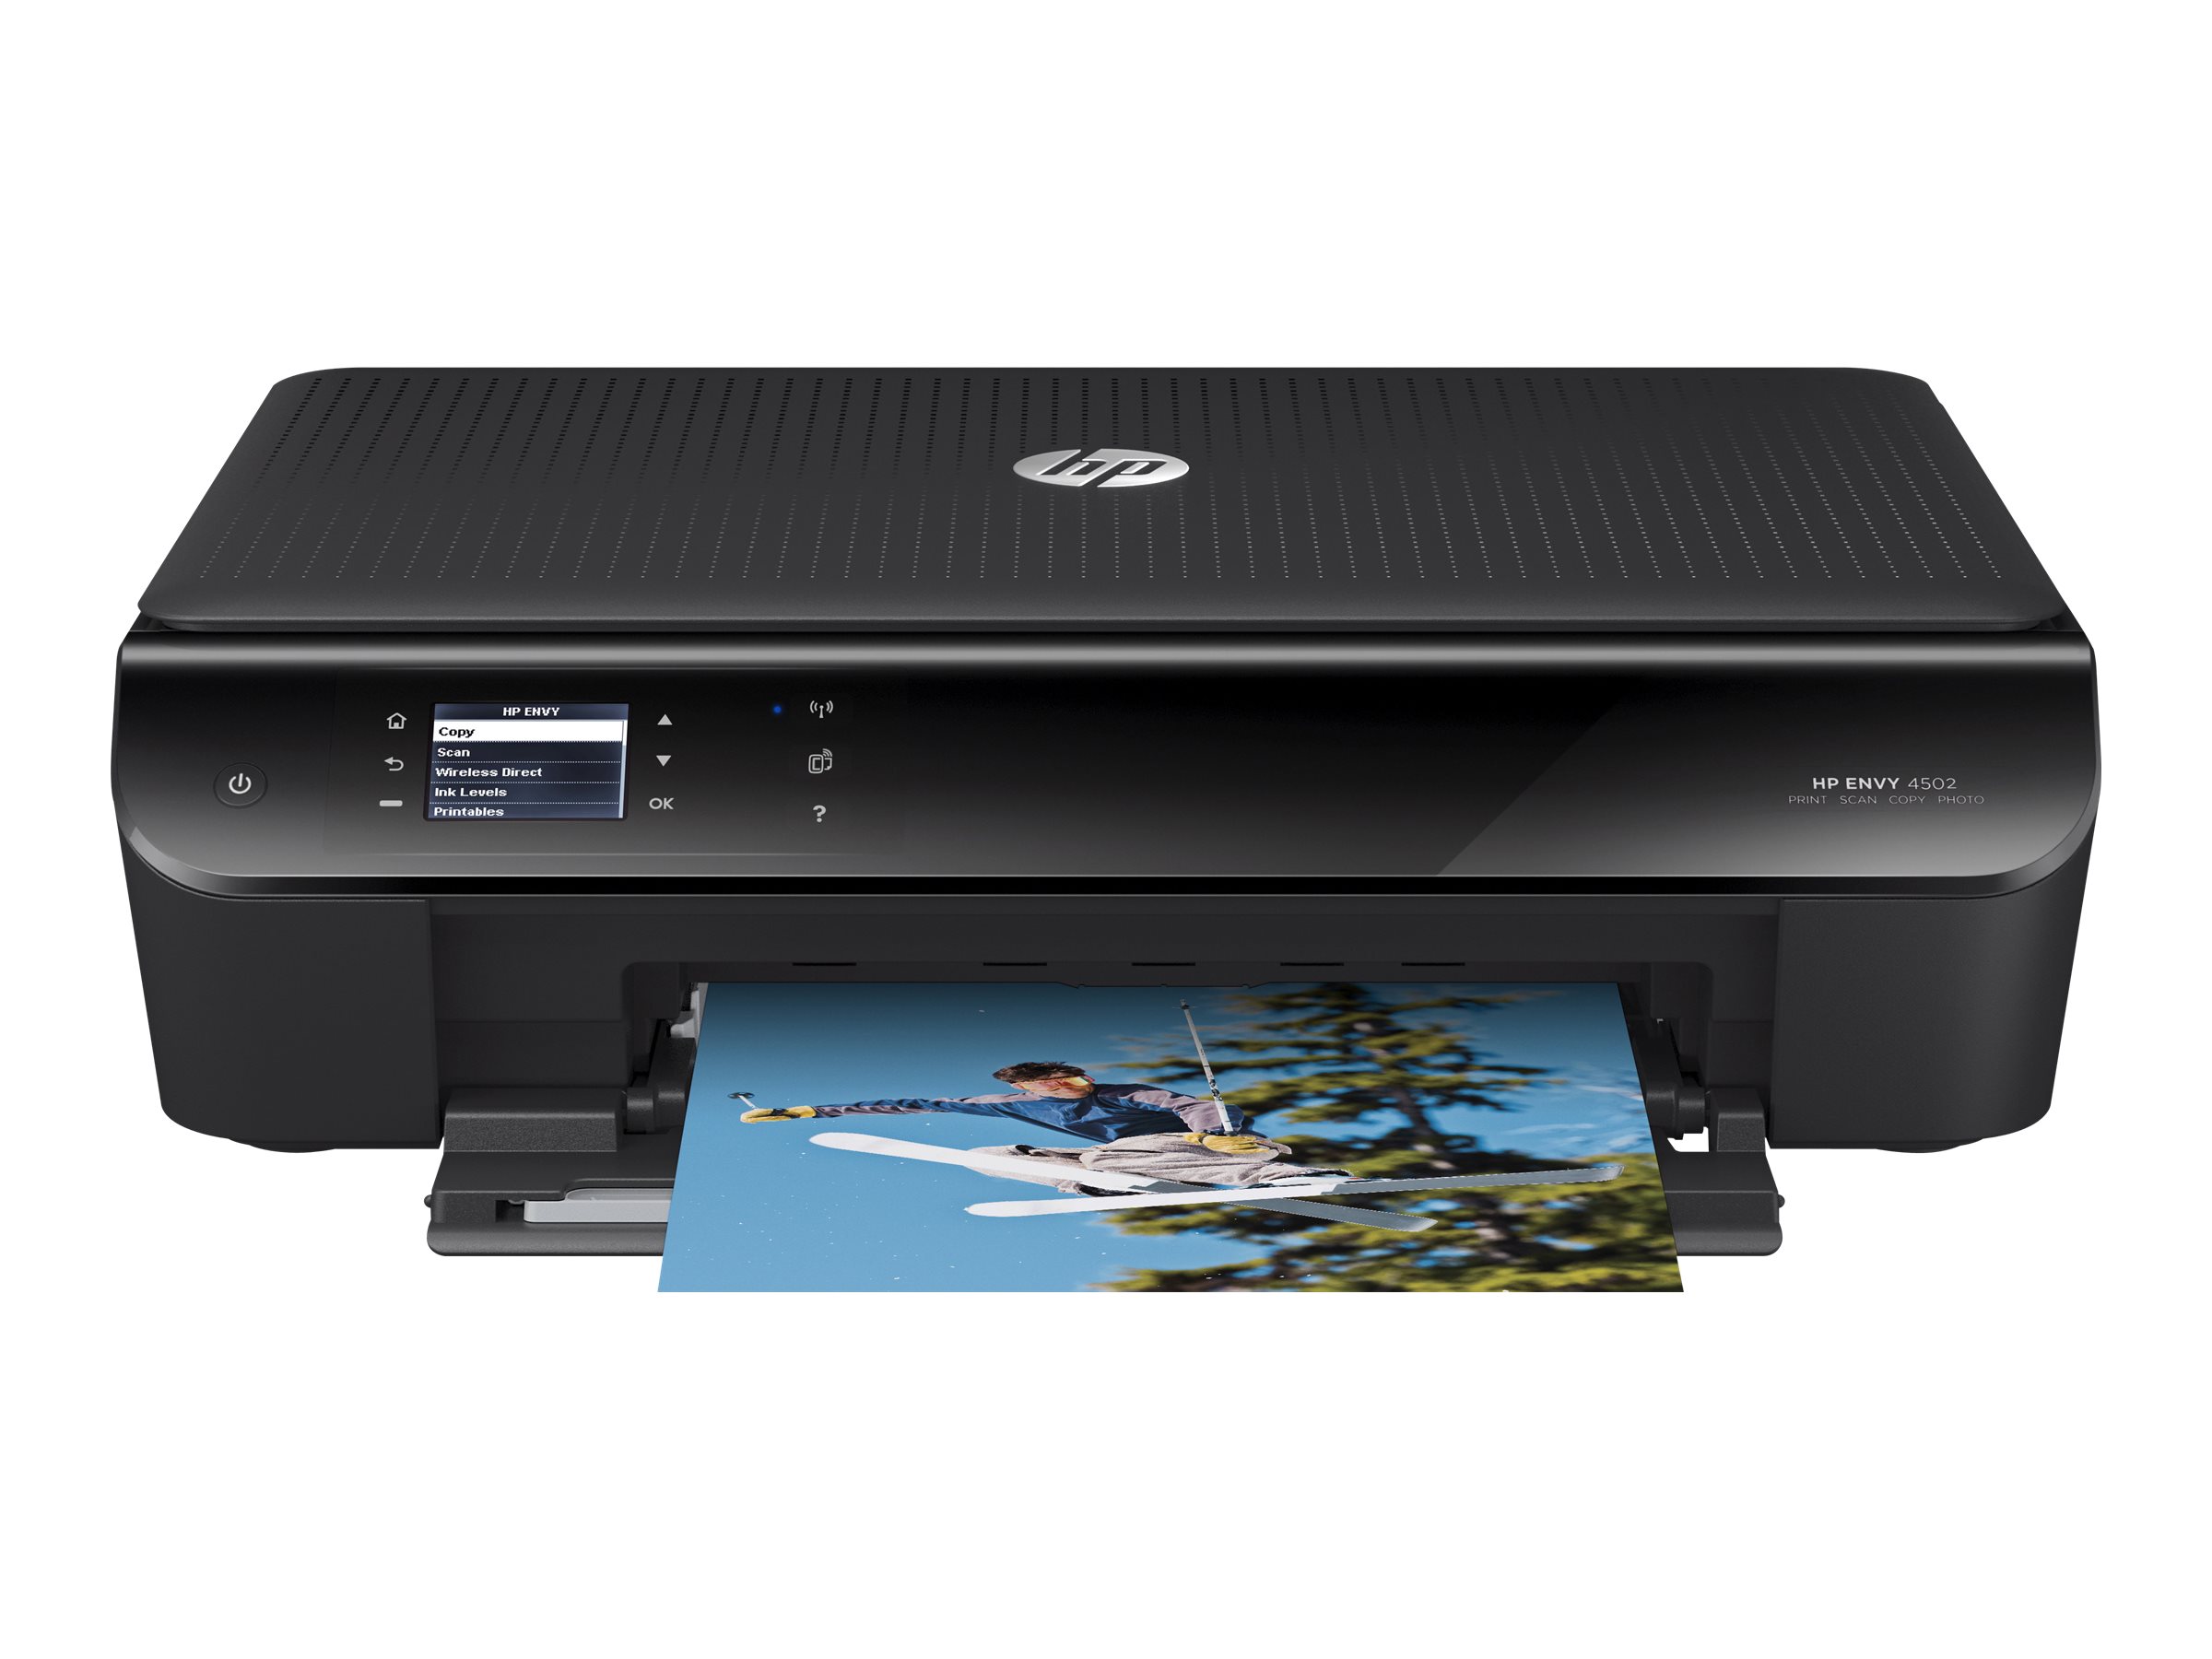 HP ENVY 4502 e-All-in-One - Multifunction printer - color - ink-jet - Legal (8.5 in x 14 in)/A4 (8.25 in x 11.7 in) (original) - A4/Legal (media) - up to 6 ppm (copying) - up to 8.8 ppm (printing) - 100 sheets - USB 2.0, Wi-Fi(n) - image 3 of 5